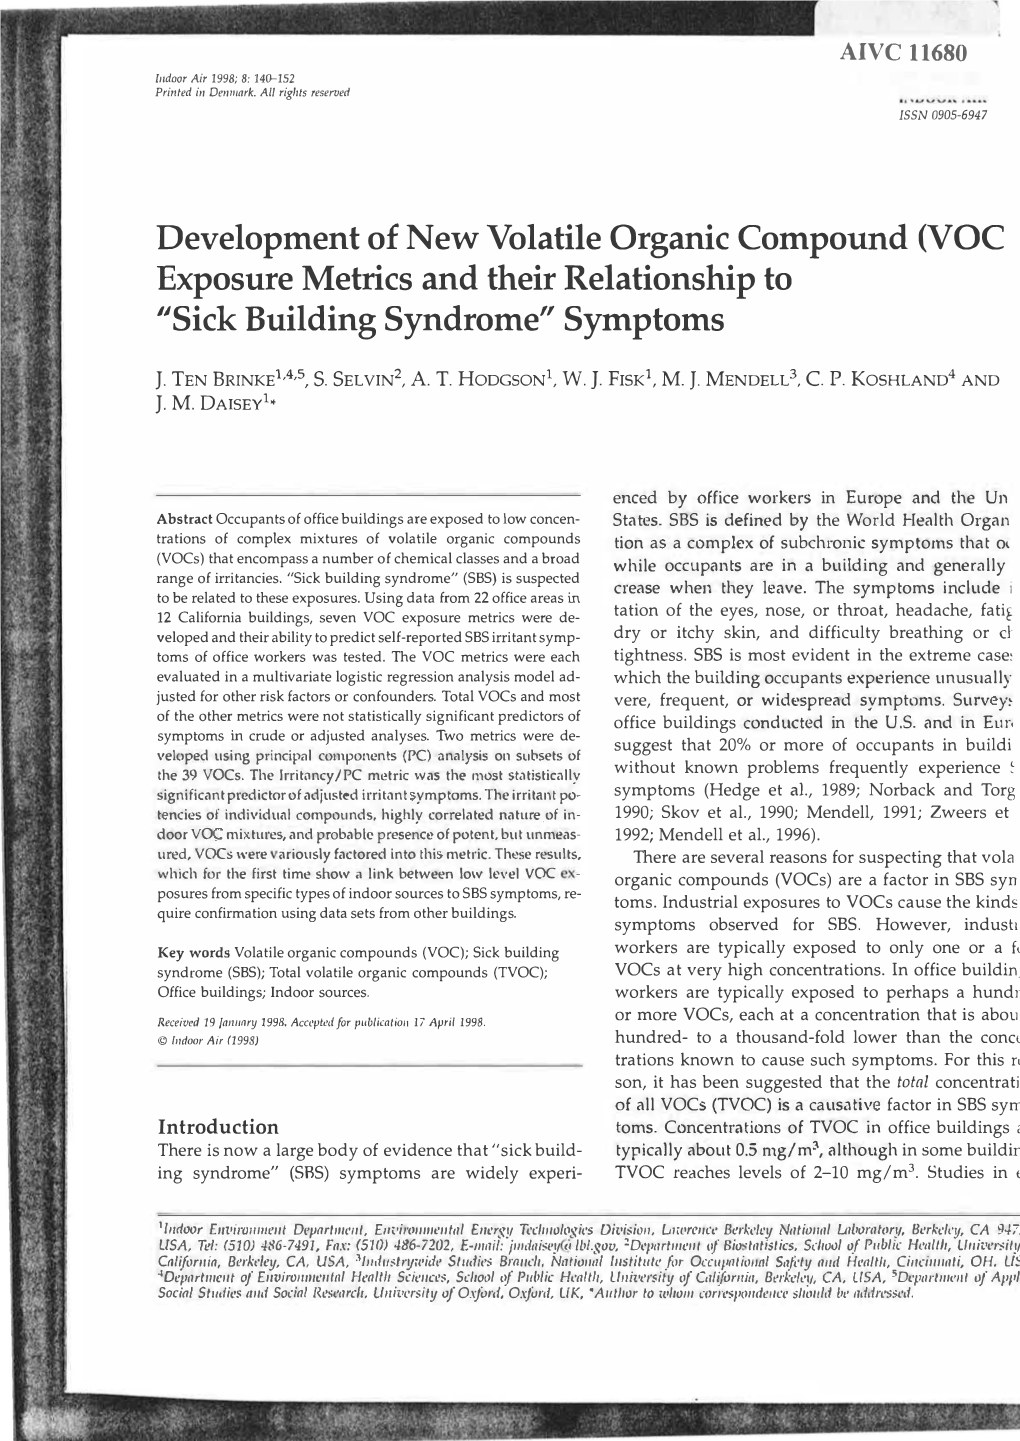 Development of New Volatile Organic Compound (VOC Exposure Metrics and Their Relationship to "Sick Building Syndrome" Symptoms